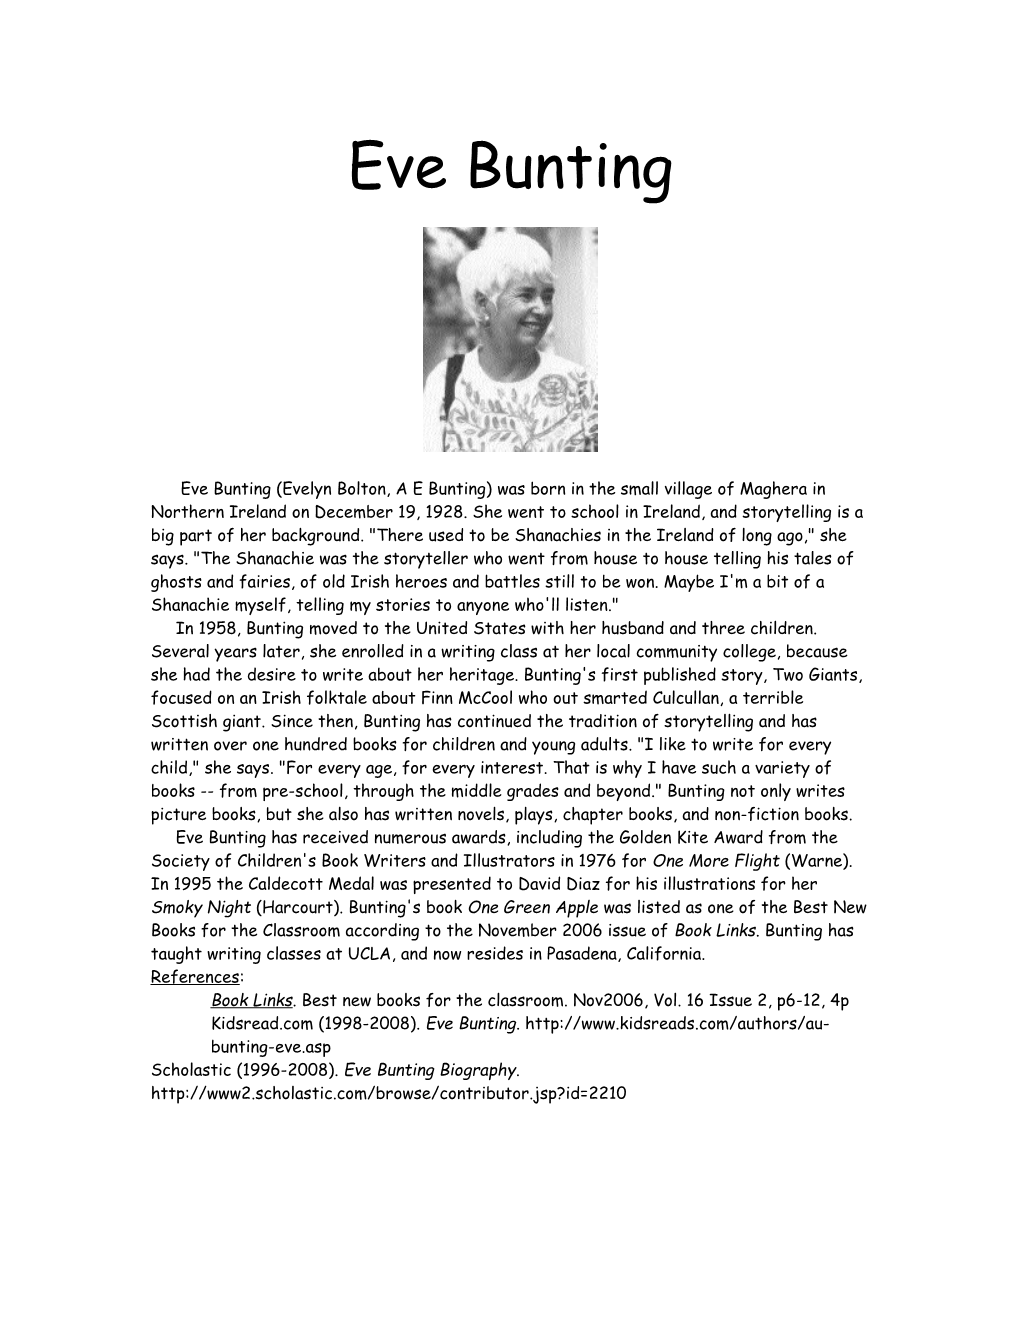 Scholastic (1996-2008). Eve Bunting Biography